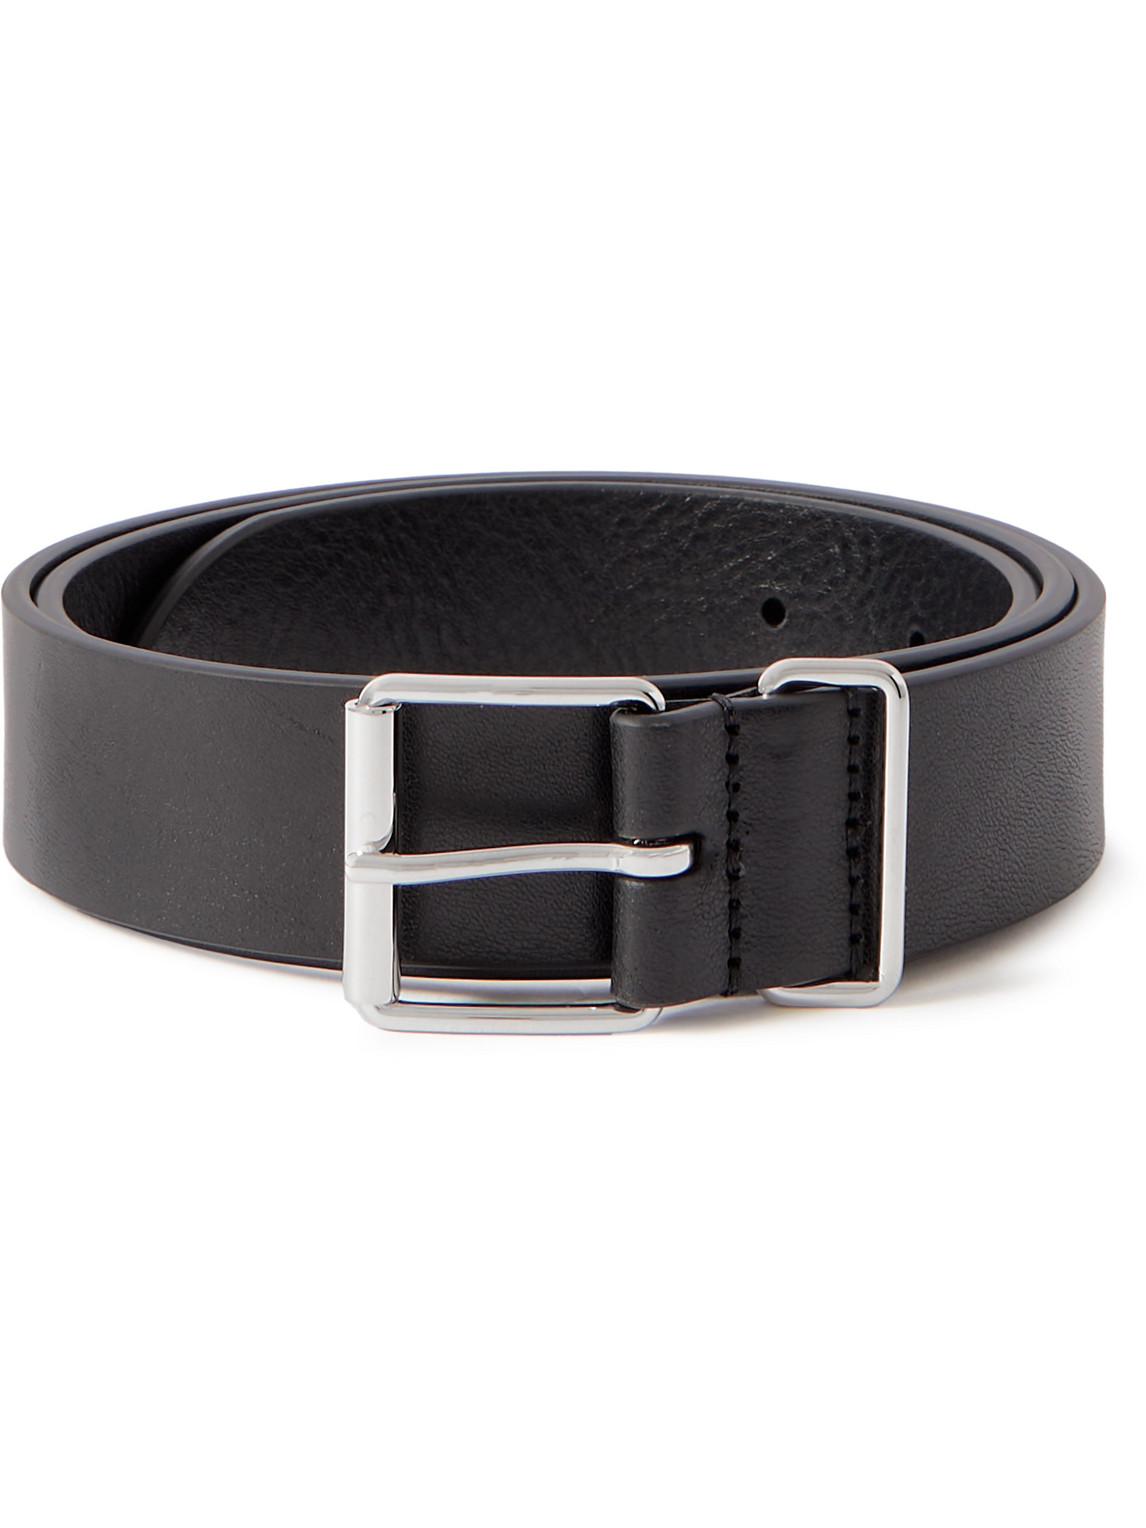 Anderson's Narrow Leather Belt In Black